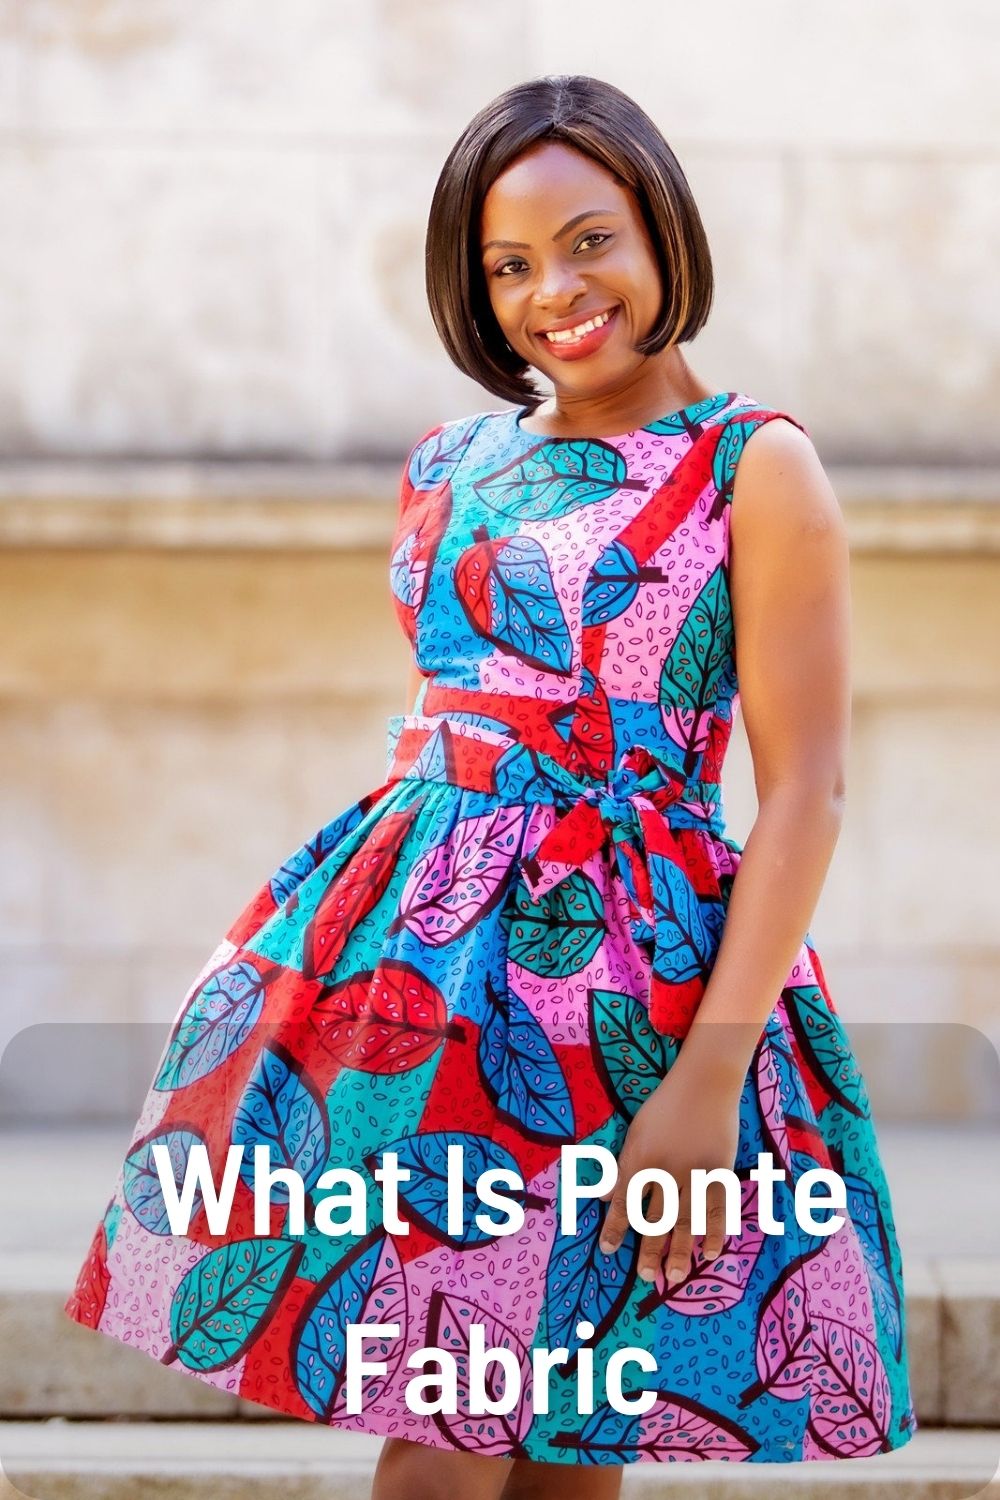 What Is Ponte Fabric